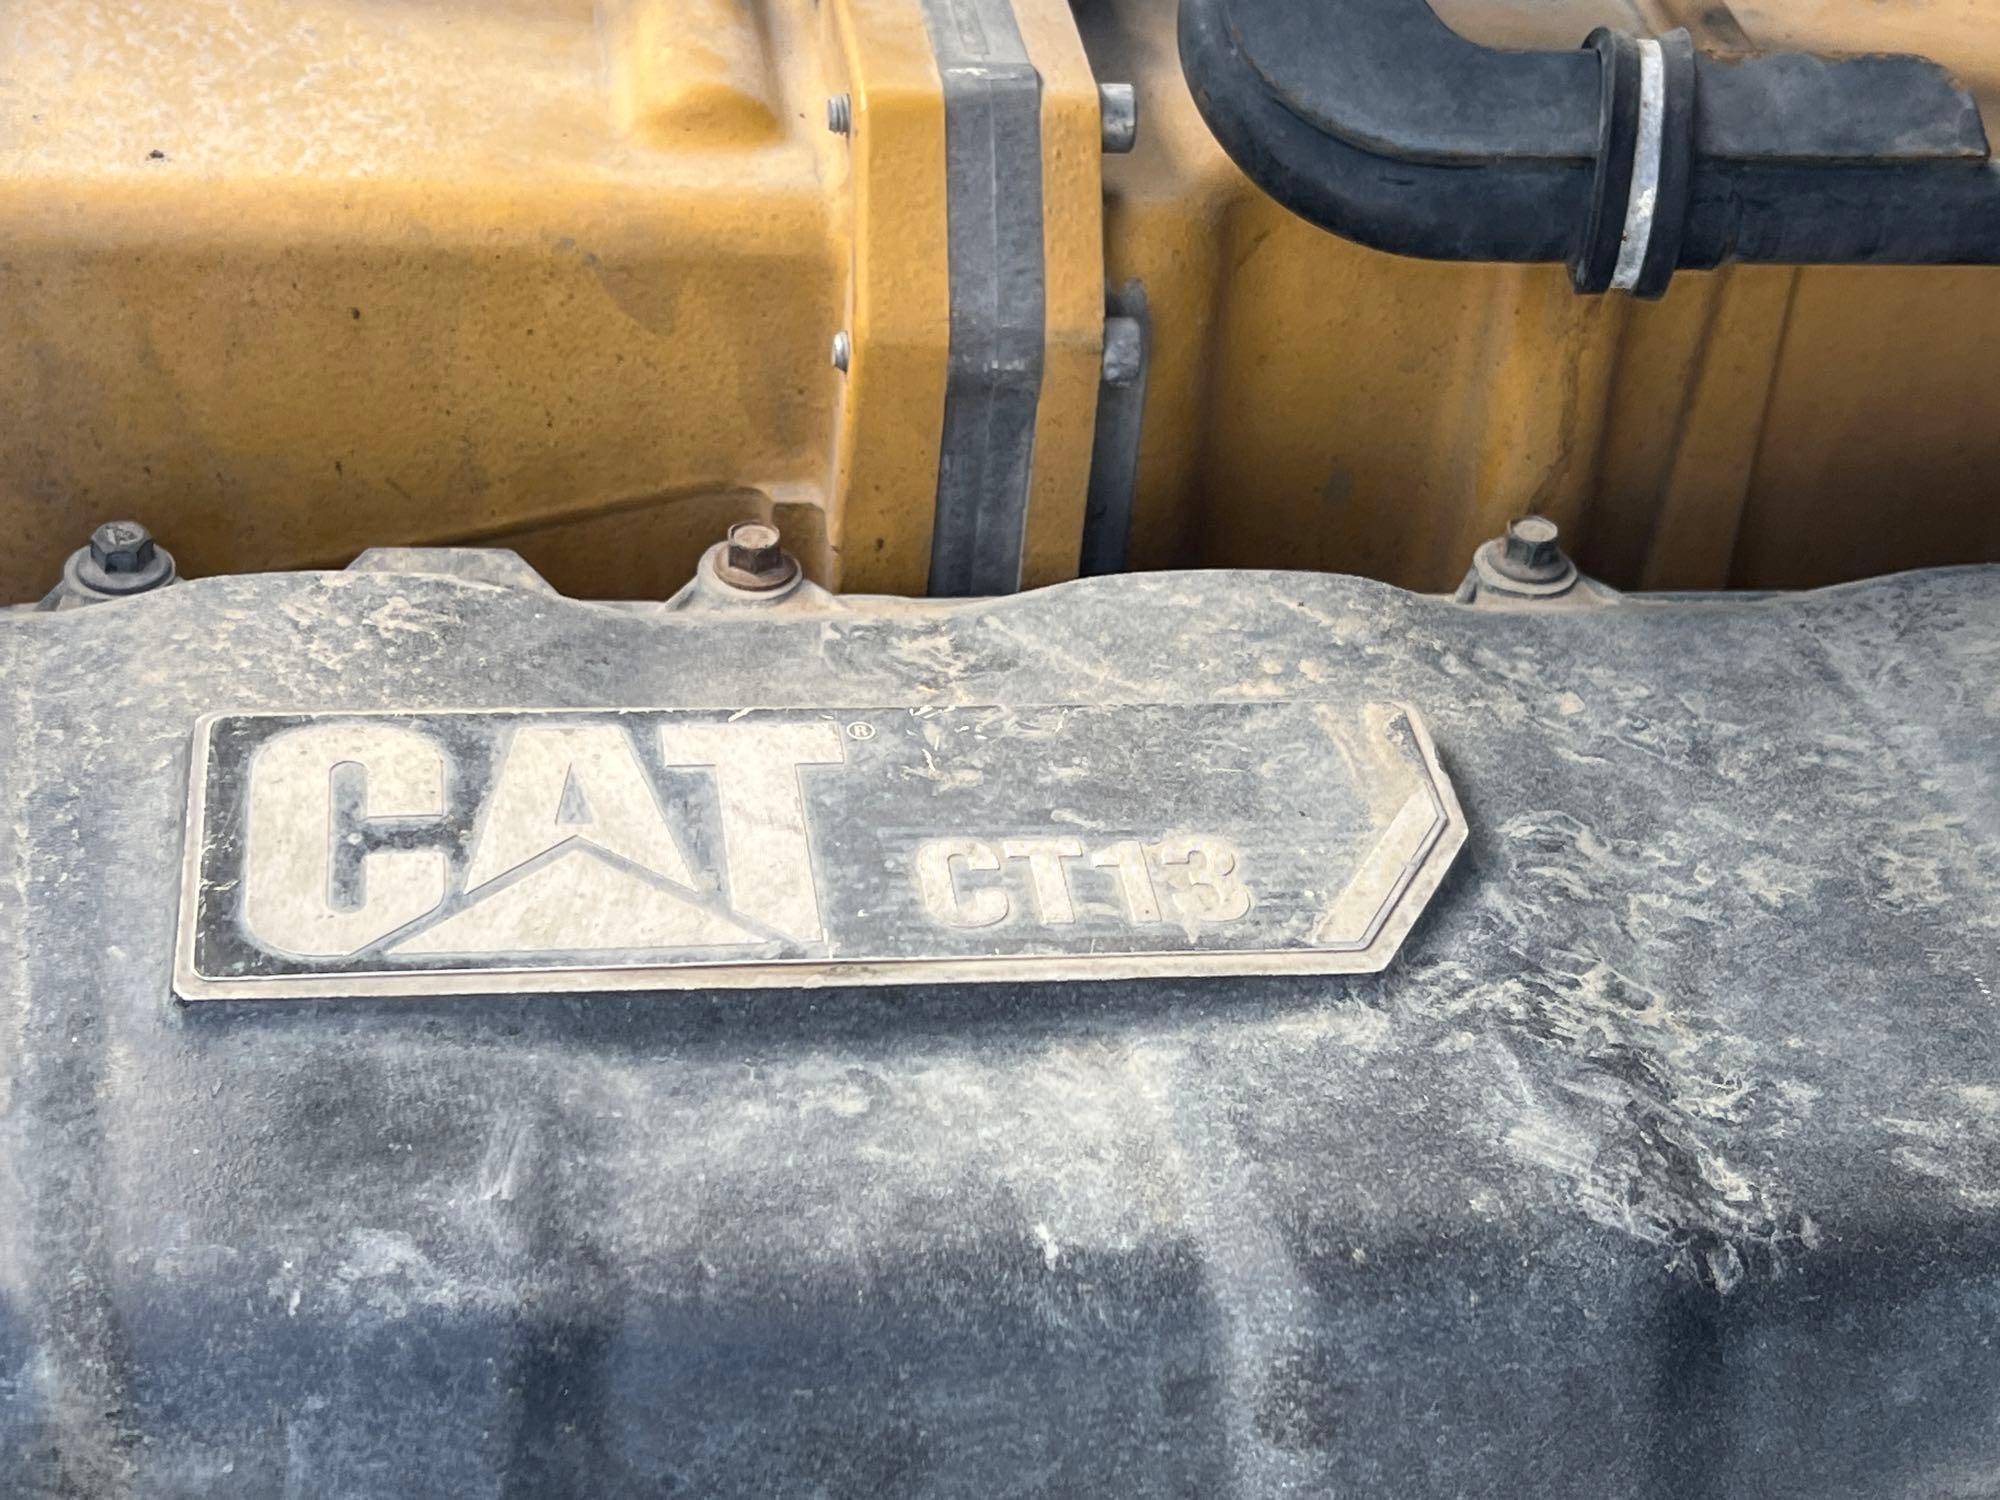 2014 CAT CT660 FUEL/LUBE TRUCK VN:1HTJGTKTXEJ495272 powered by Cat diesel engine, equipped with